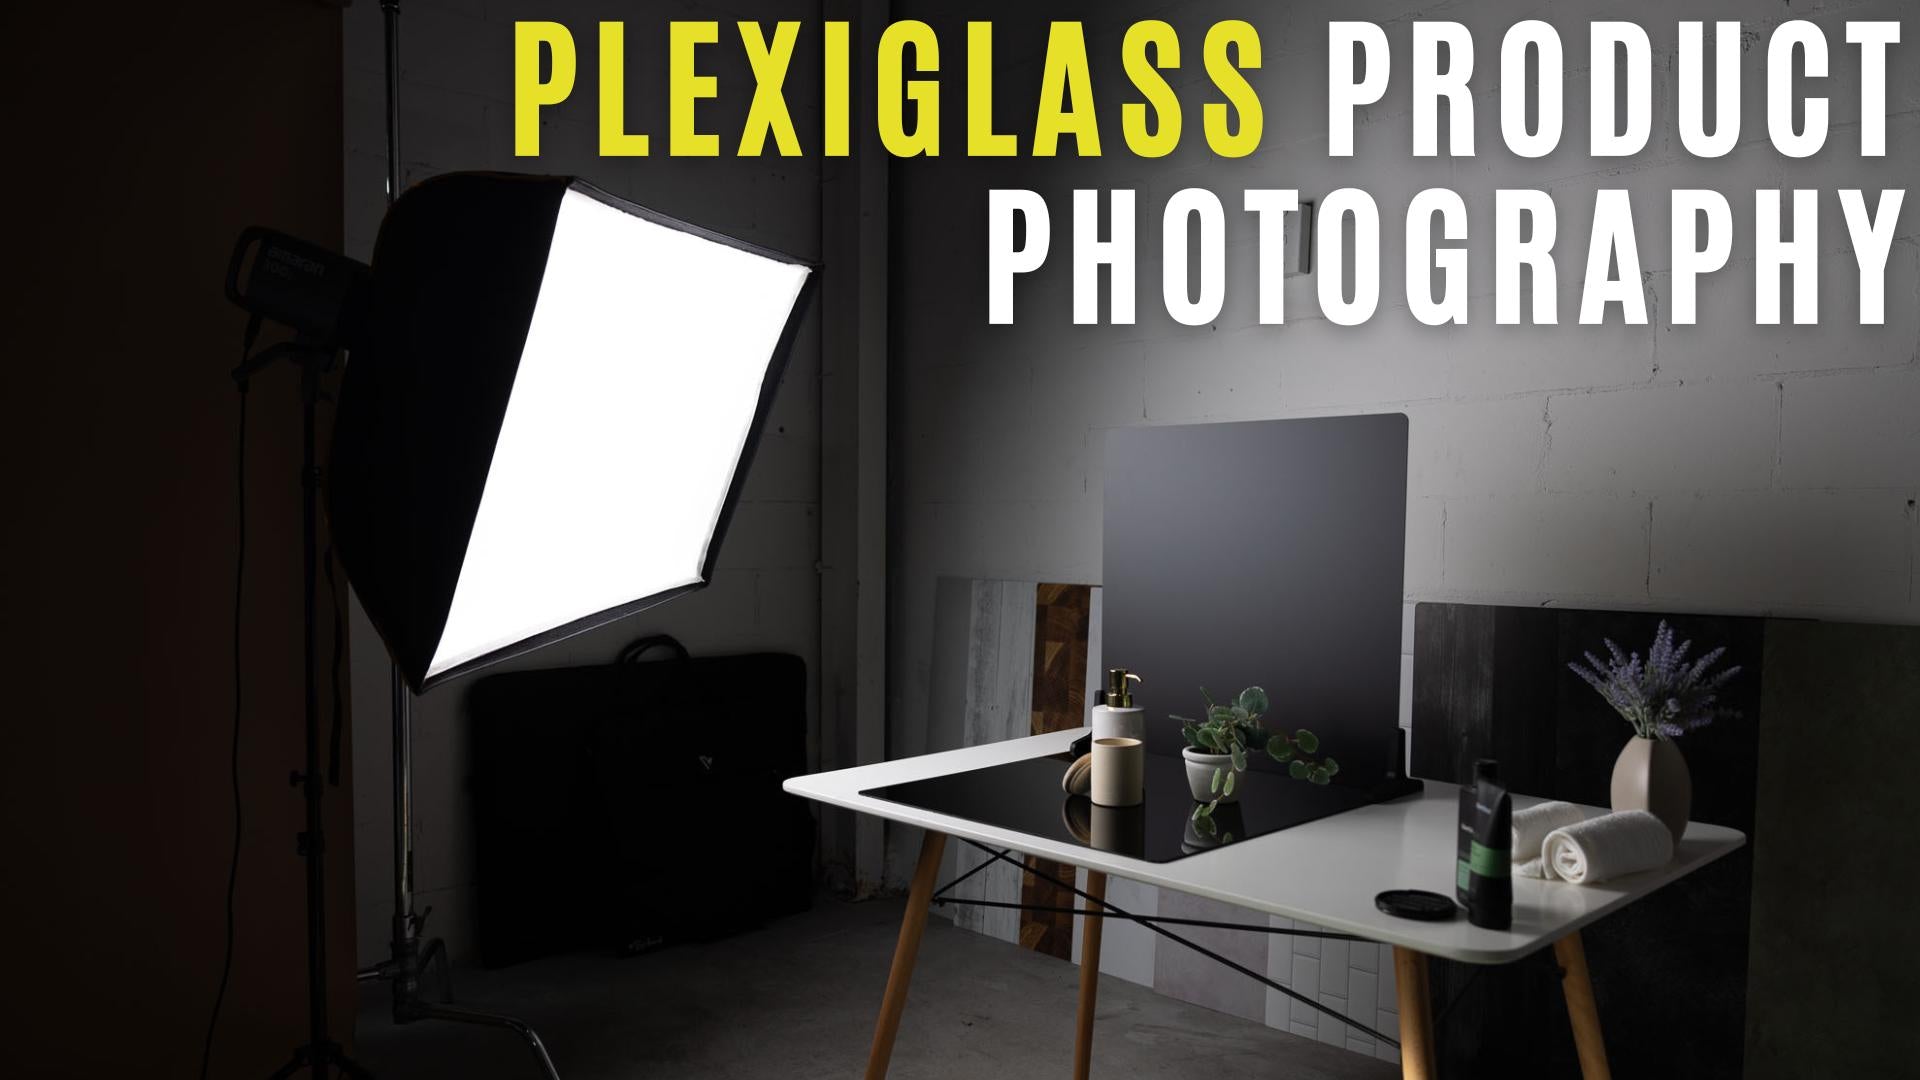 Product photography setup in studio with plexiglass Duo Board and softbox.